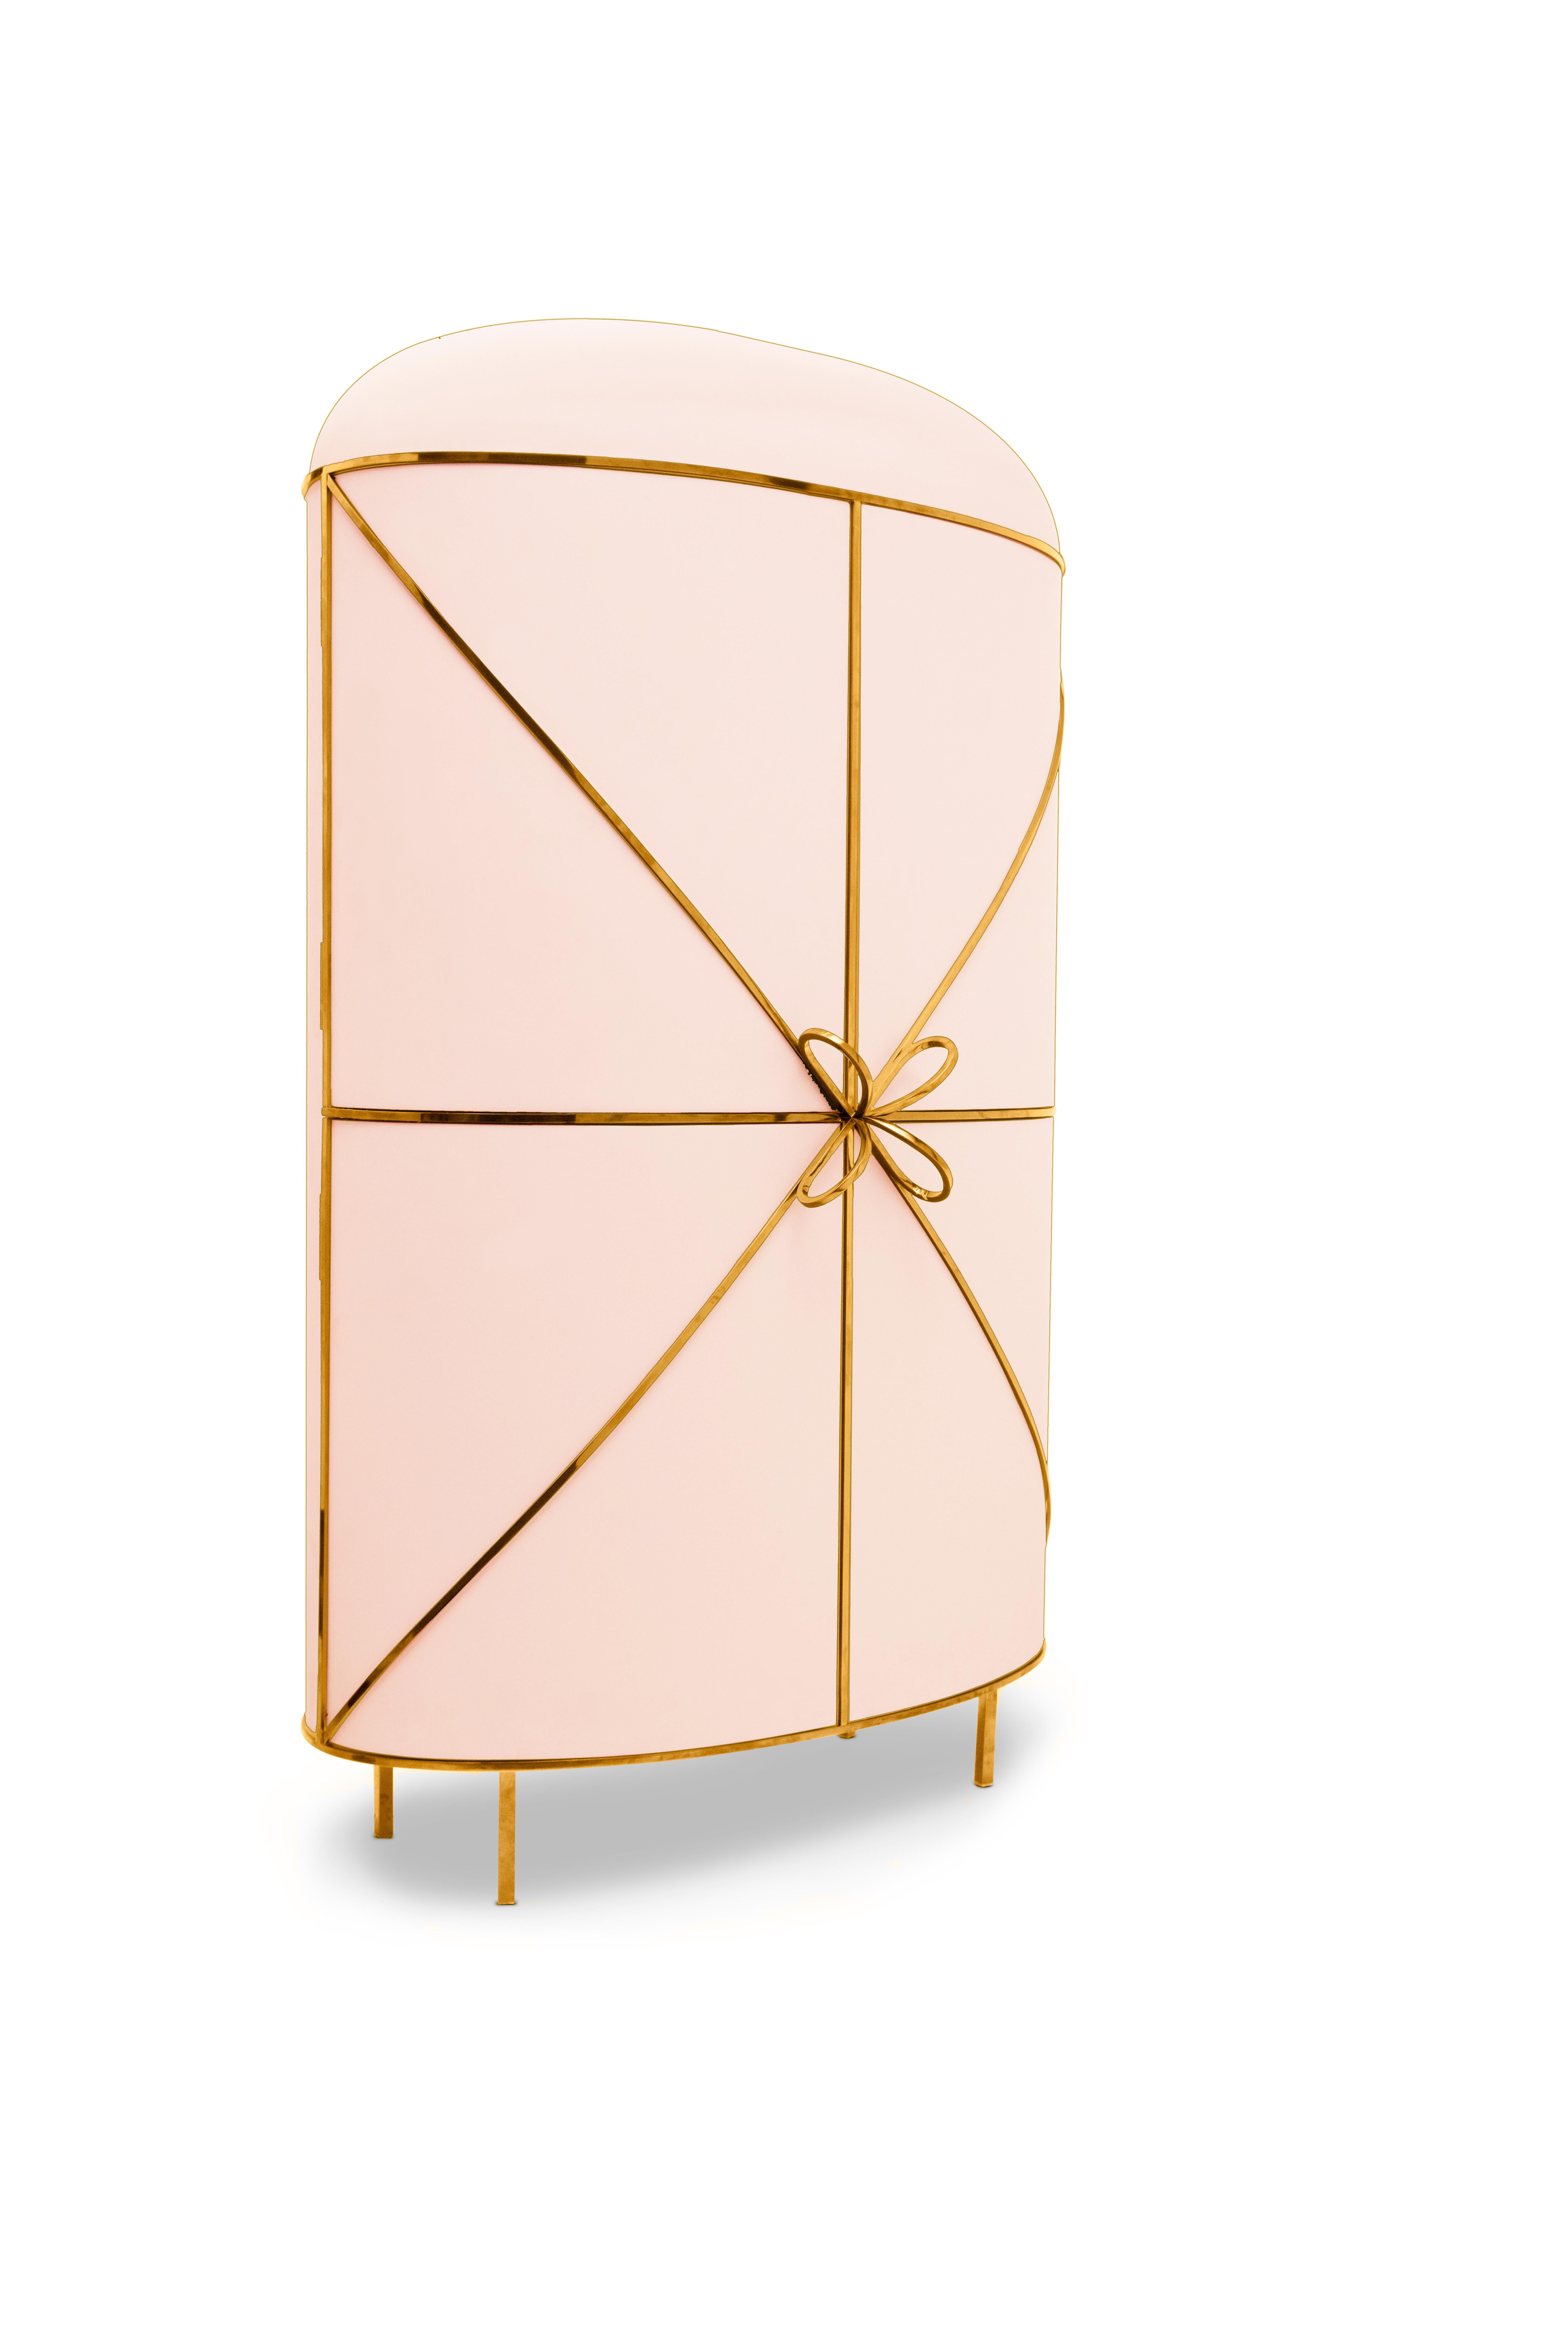 88 Secrets Pink Bar Cabinet with Gold Trims by Nika Zupanc is a chic pink bar cabinet in sensuous, feminine lines with luxurious gold metal trims. A statement piece in any interior space!

Nika Zupanc, a strikingly renowned Slovenian designer, never